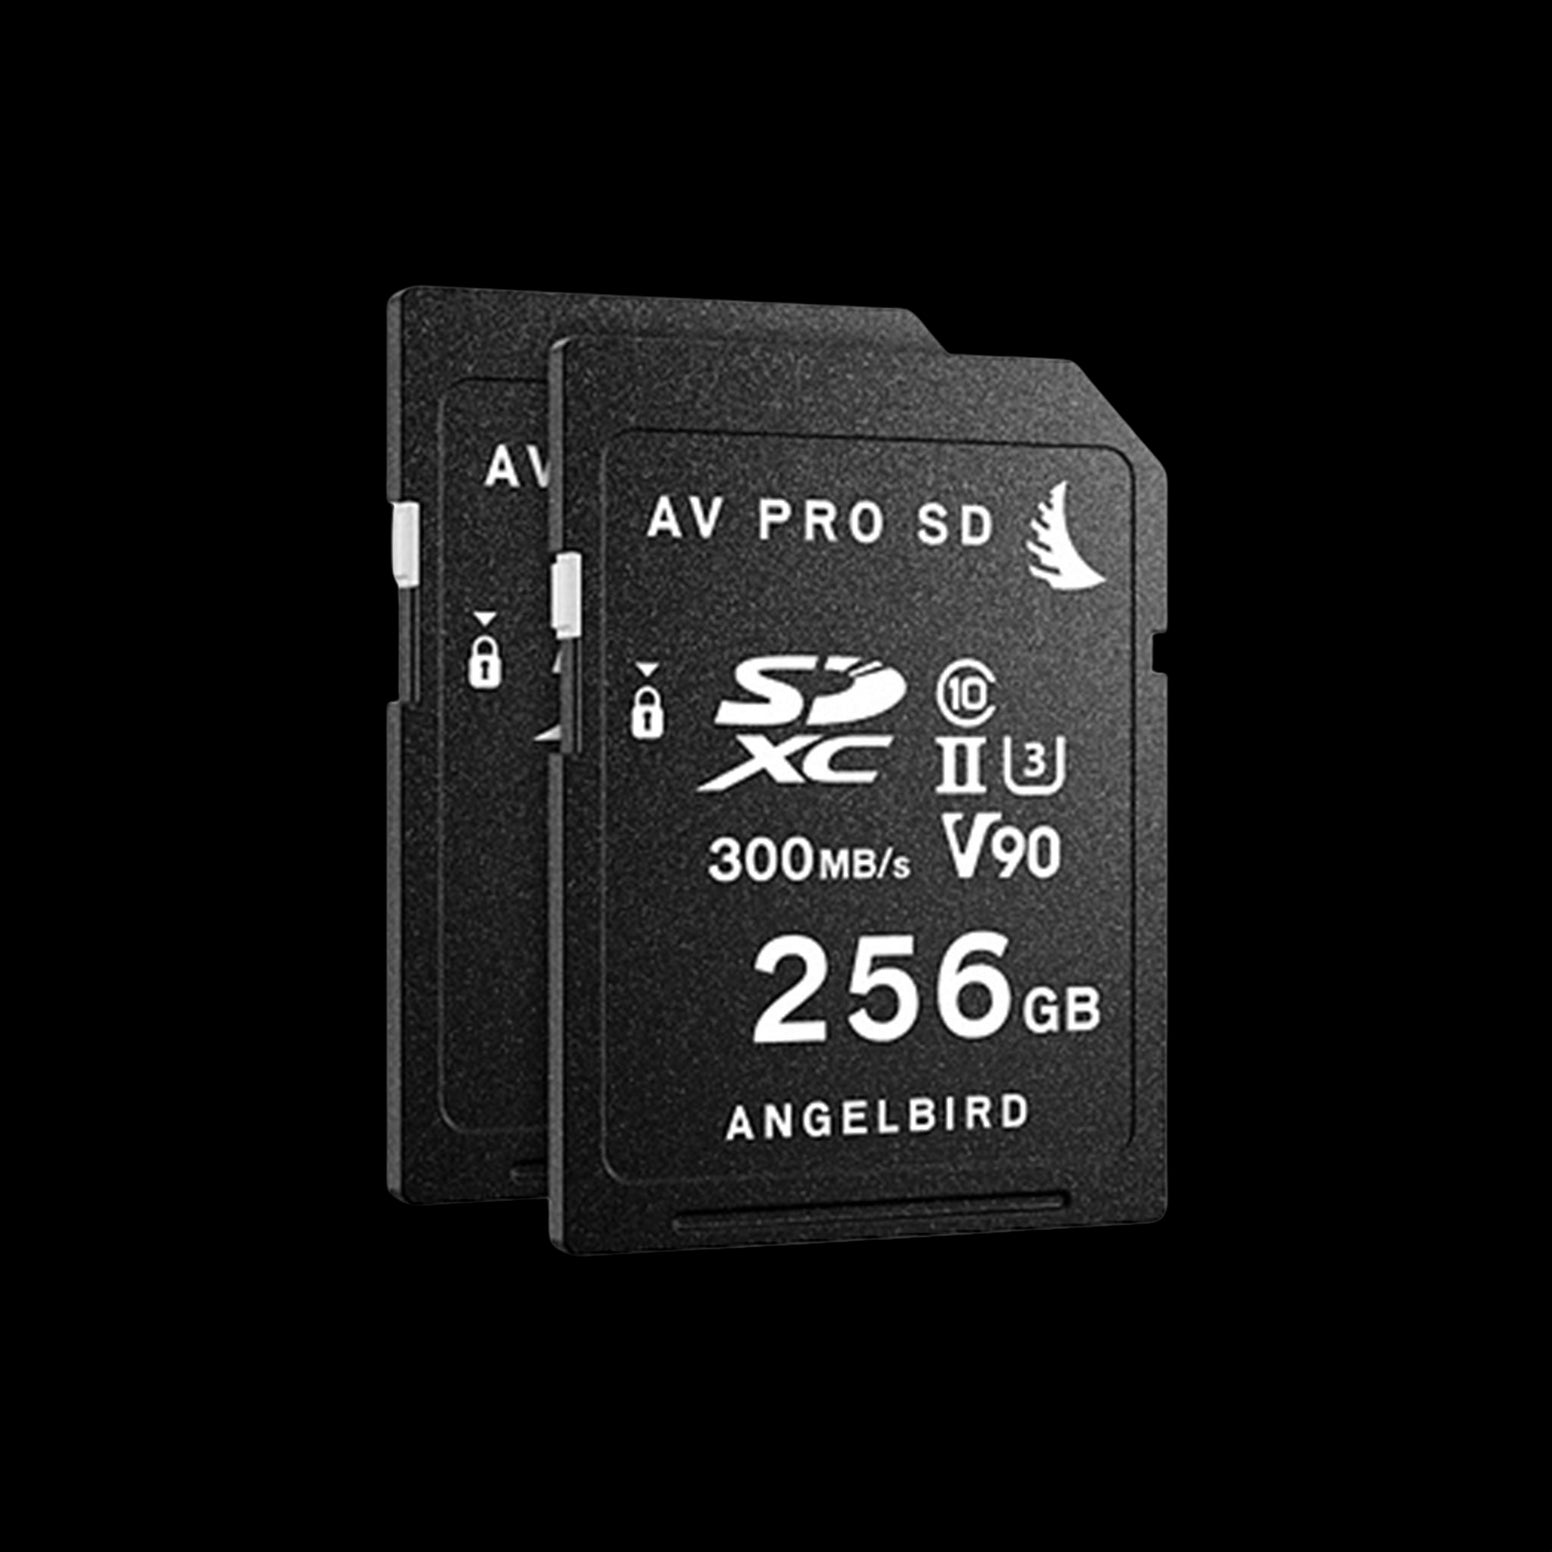 Angelbird Match Pack for Panasonic GH5/GH5S - 2 x 256GB AV PRO V90 Memory Cards - Discontinued